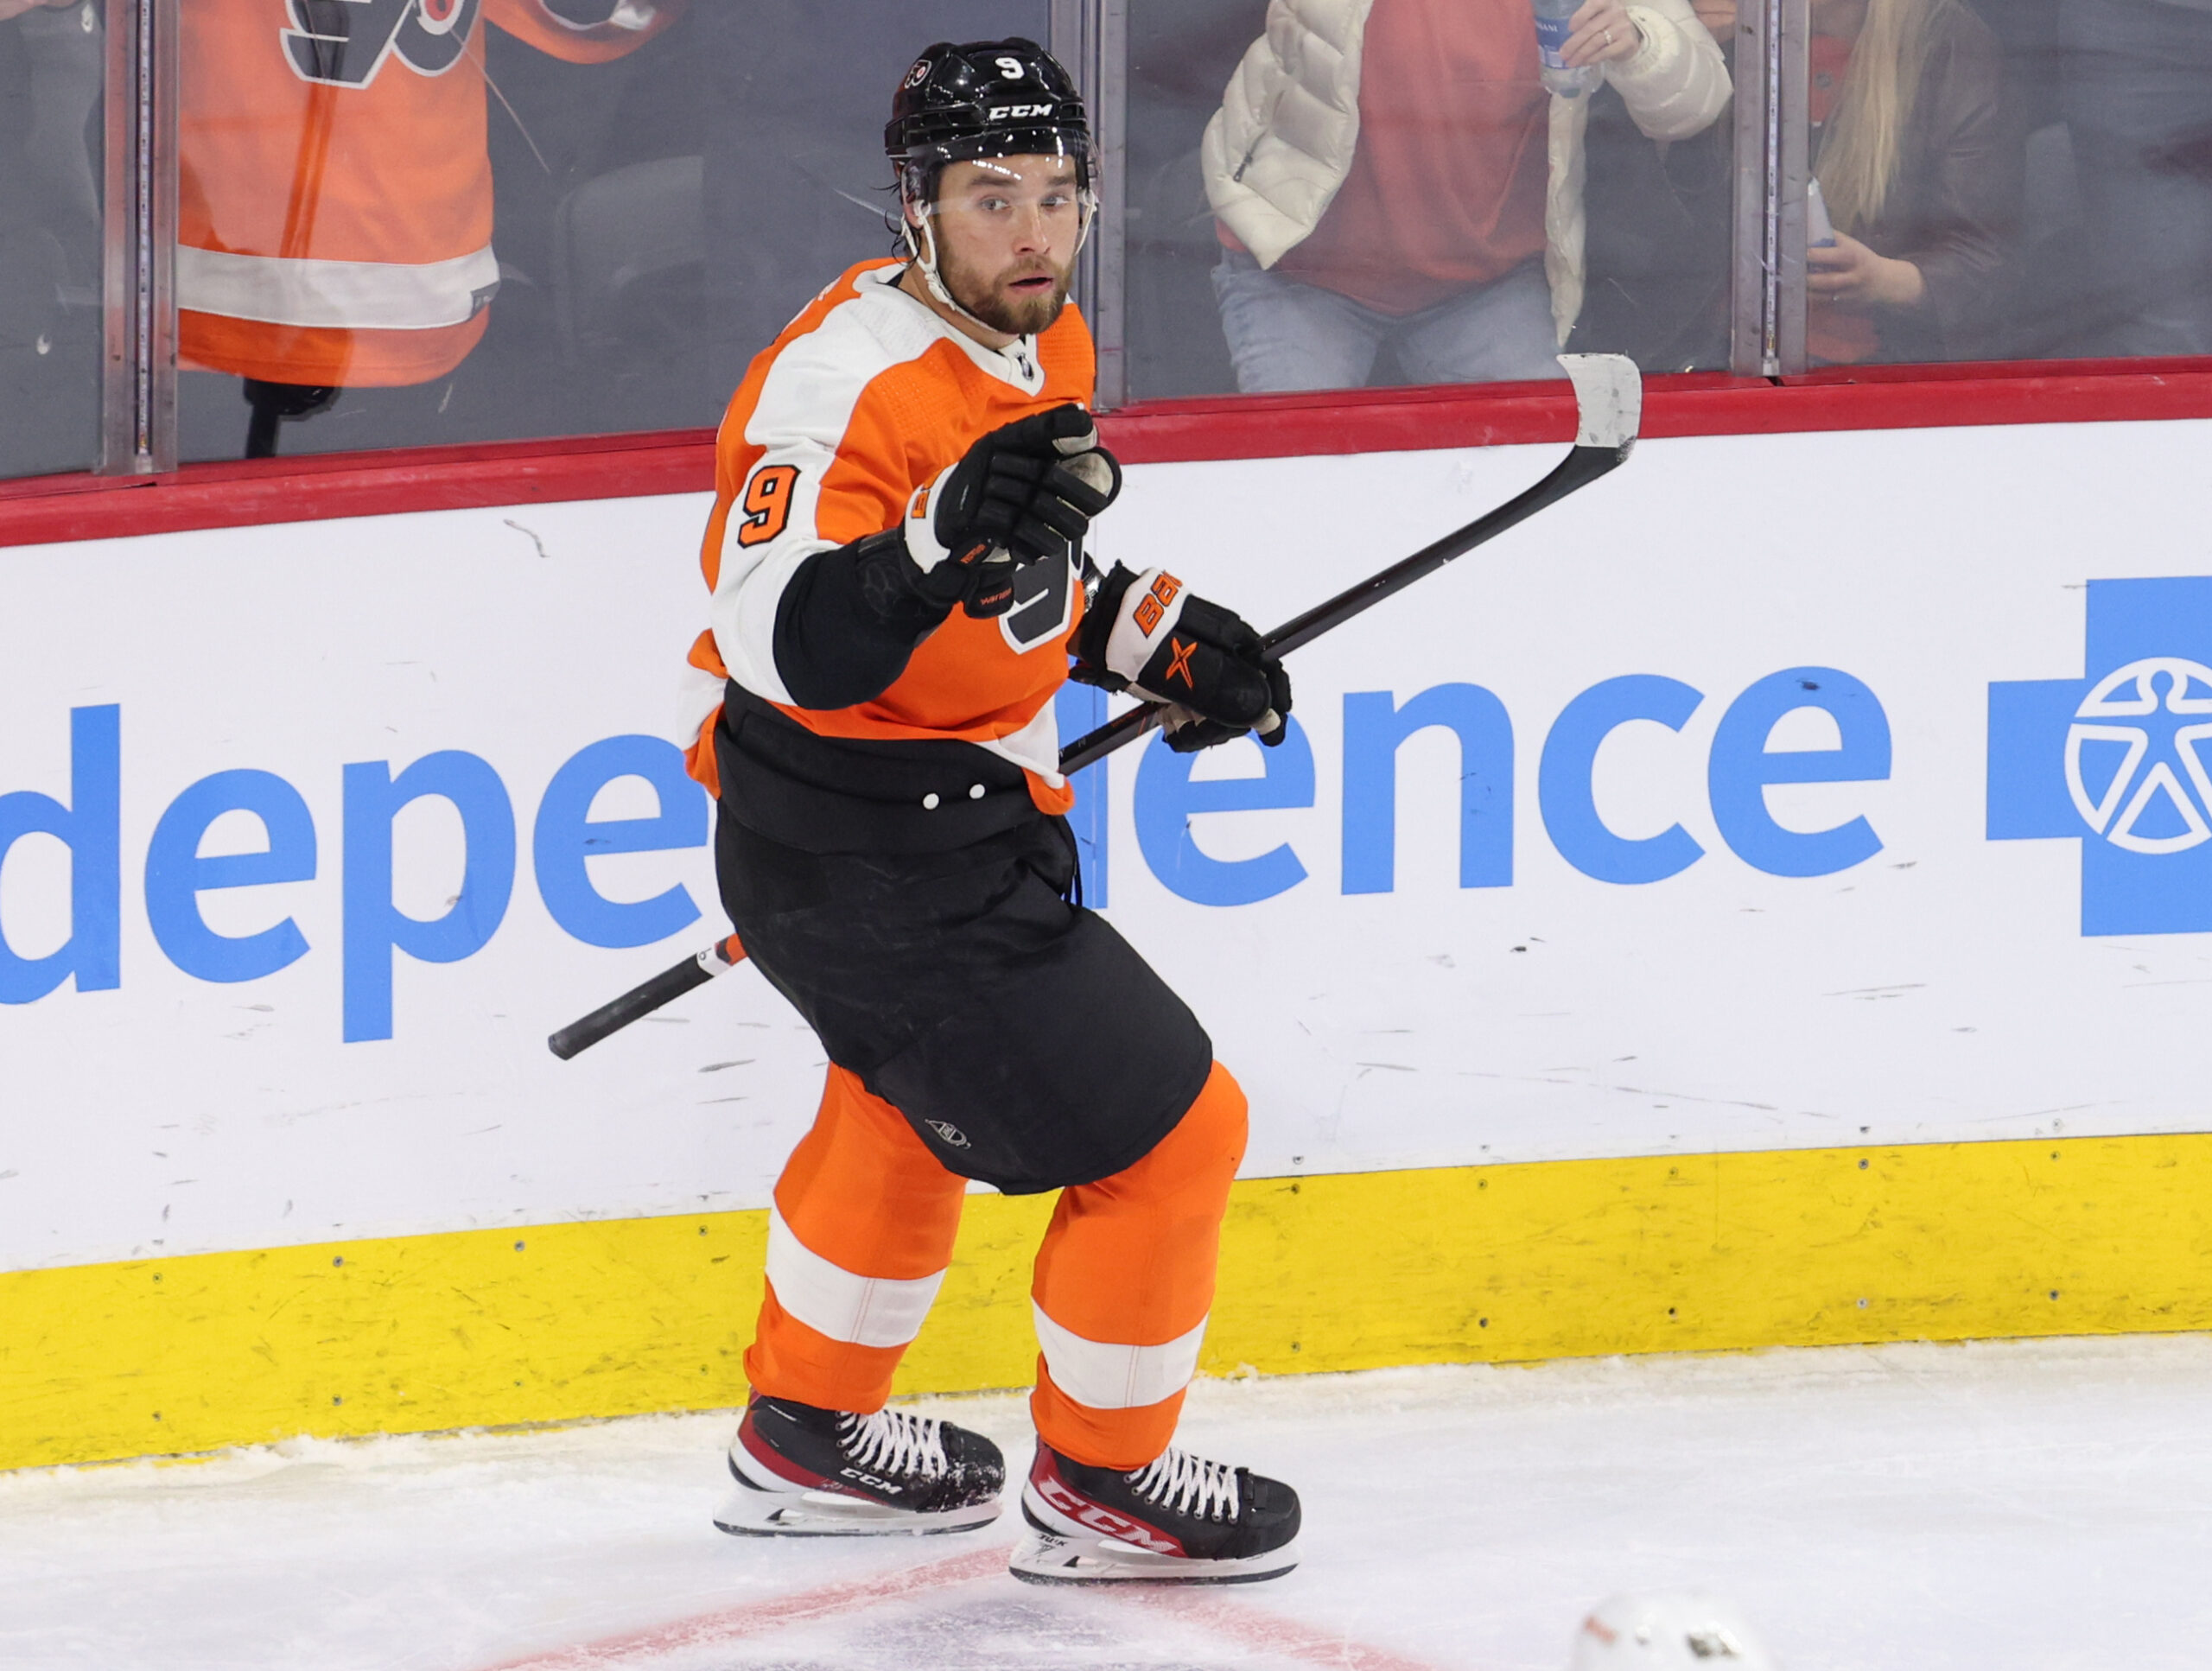 Union's Shayne Gostisbehere Looking to Strengthen His Game for the